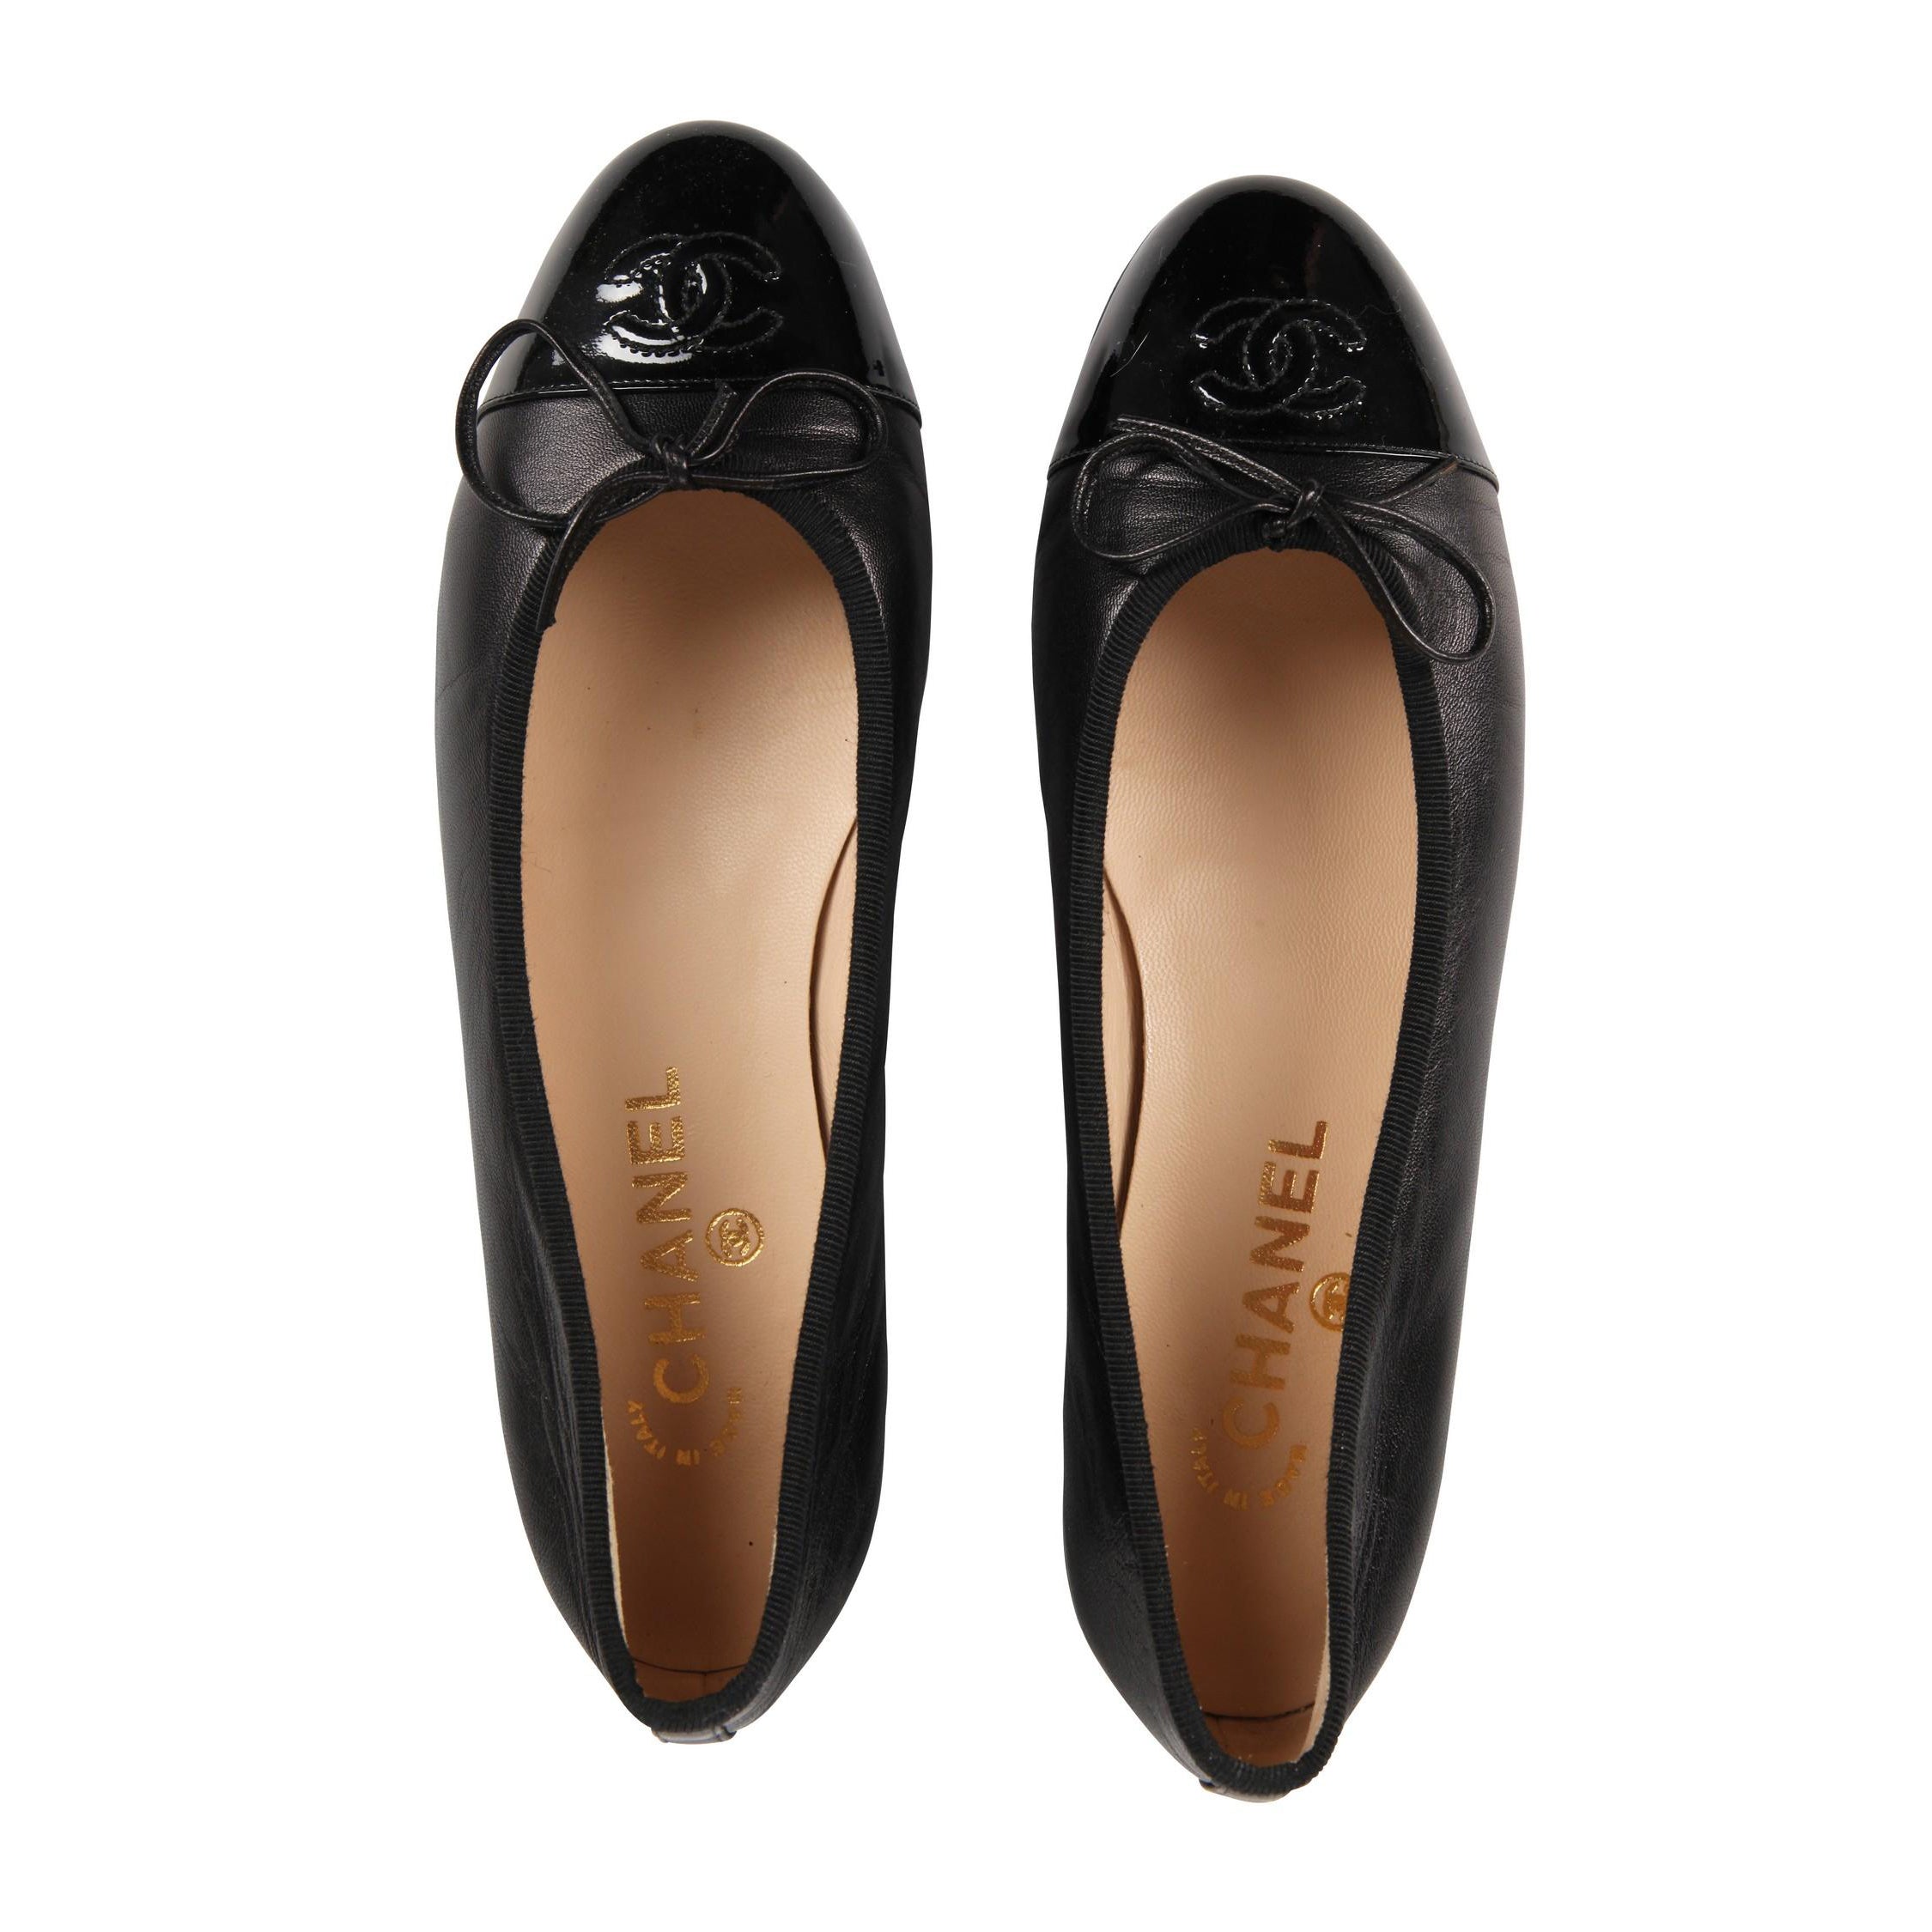 Chanel Two-Tone Leather Ballet Flats